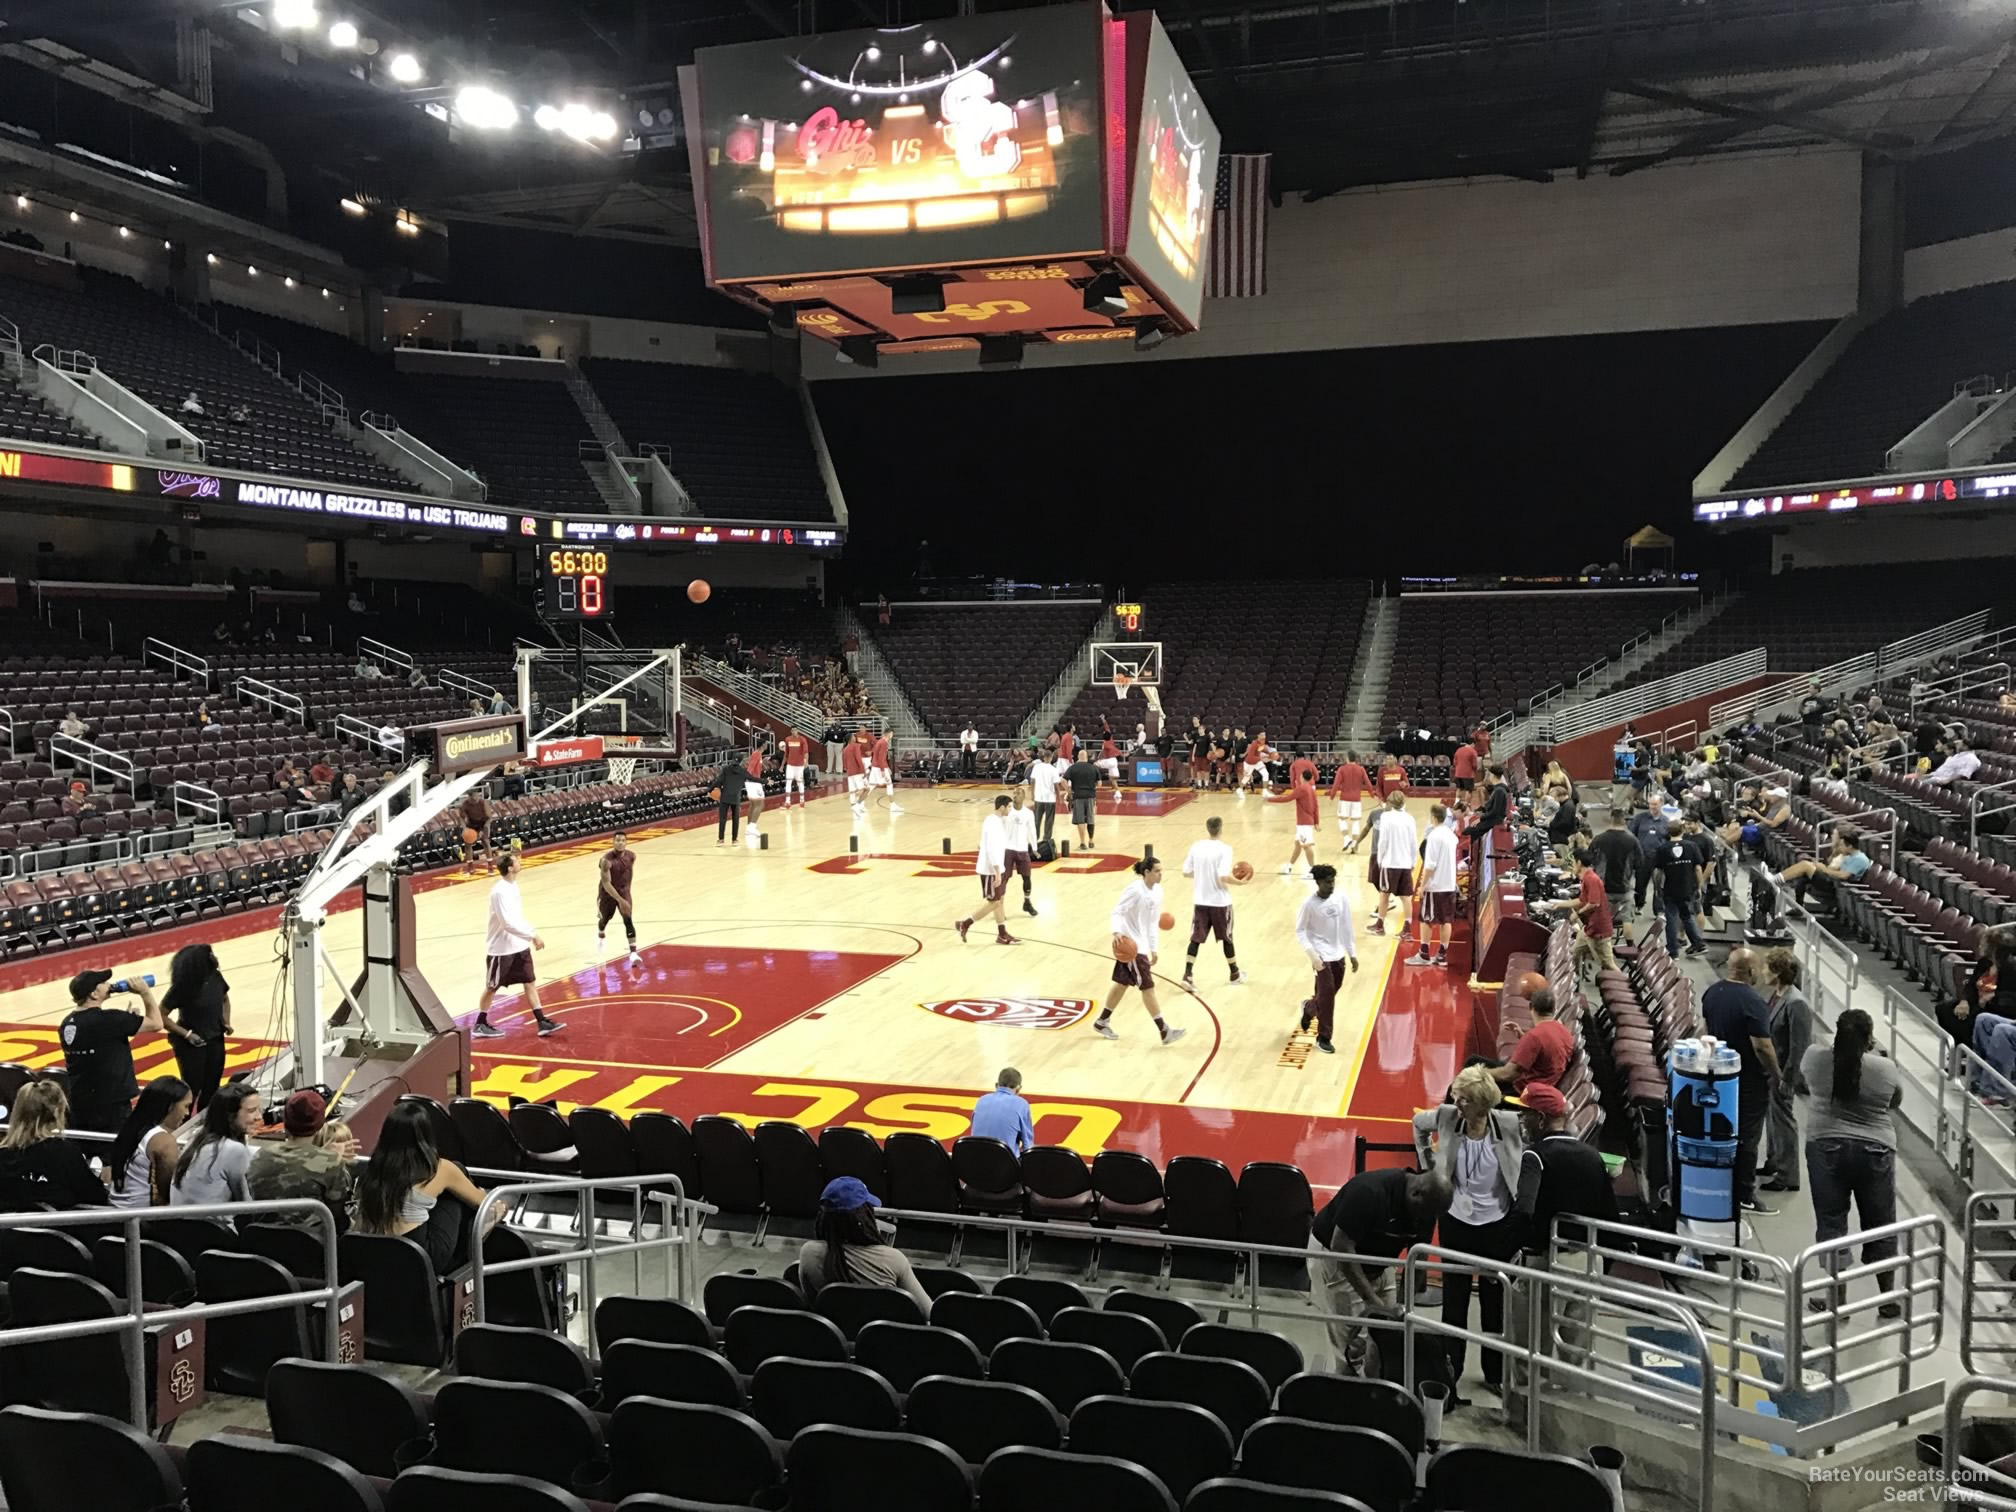 section 111, row 10 seat view  - galen center